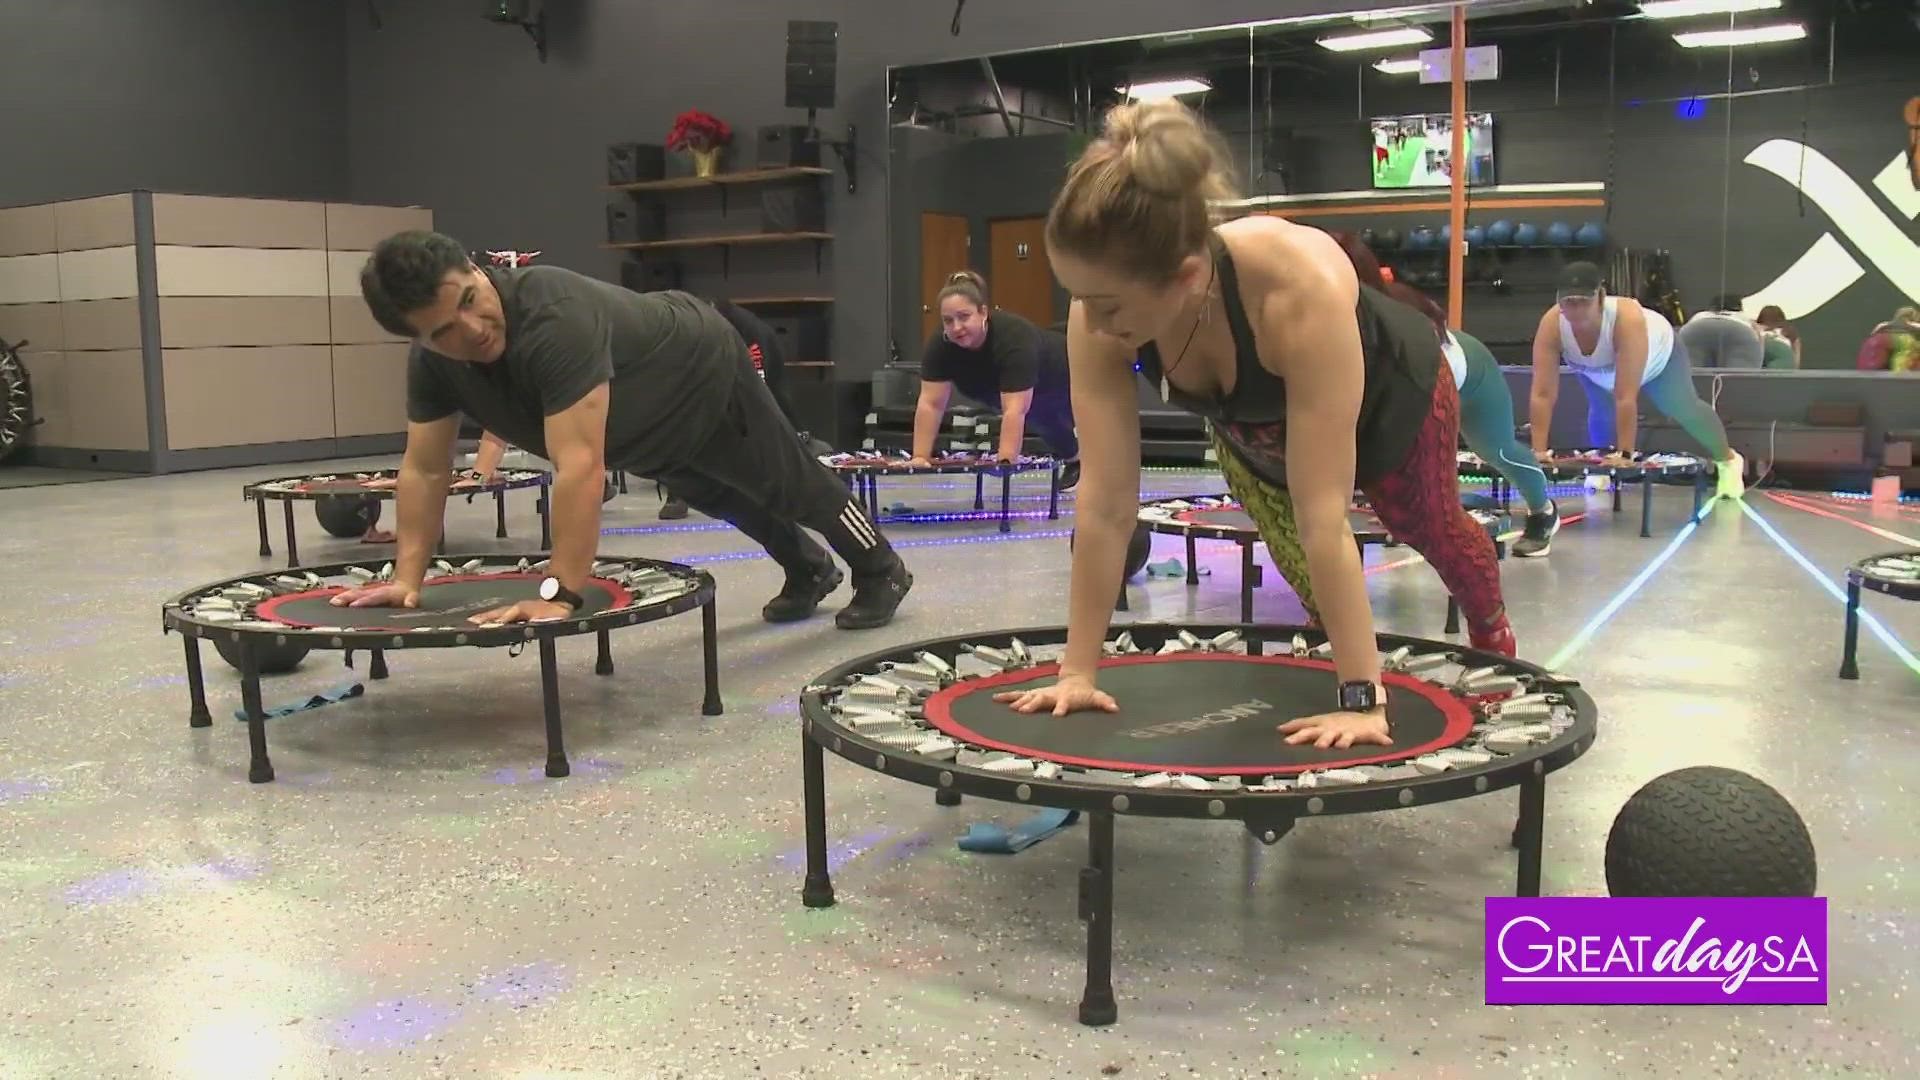 Alejandra with Alfa Fitness shows Paul how to strengthen his core using trampolines.